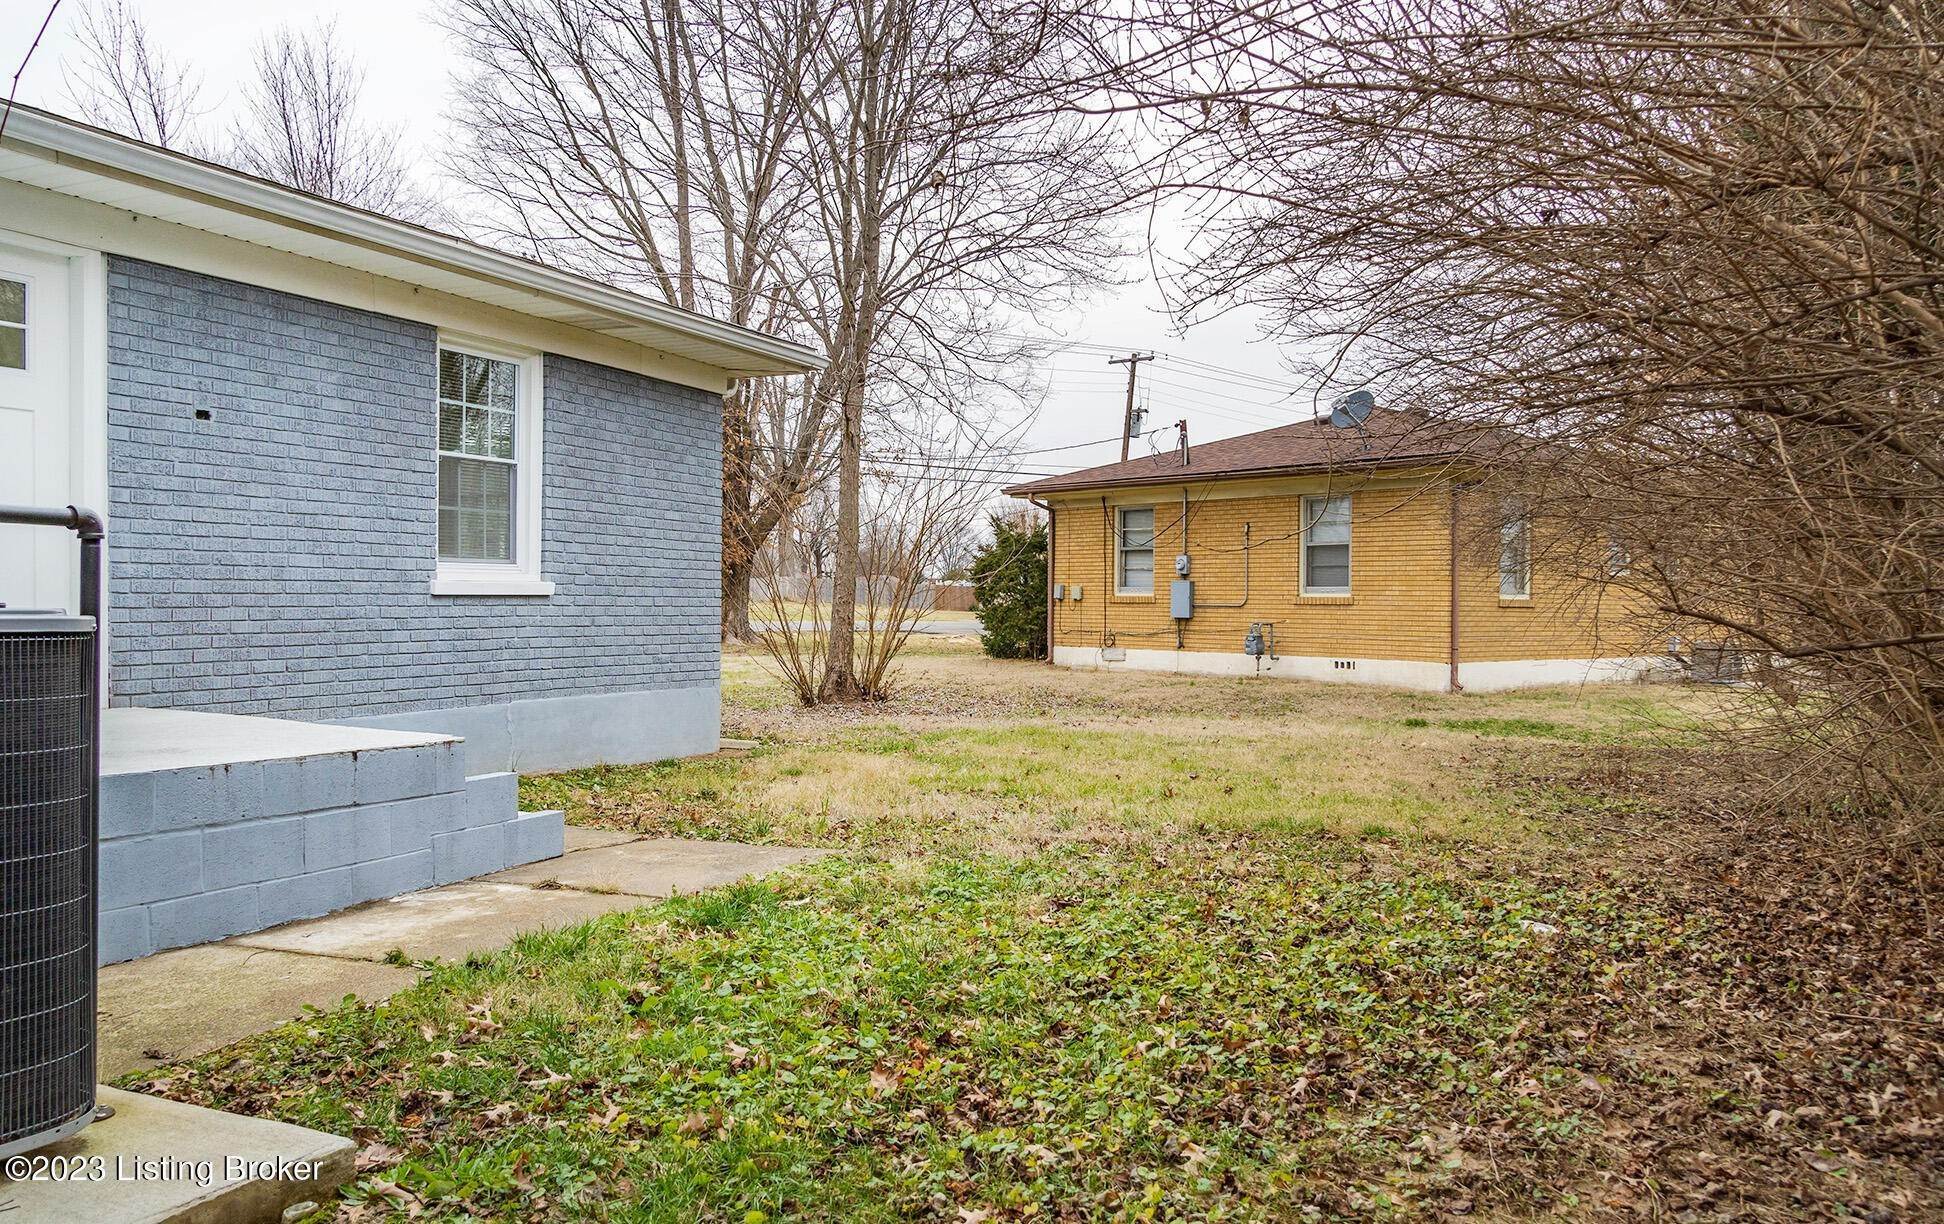 46. Single Family at Louisville, KY 40216